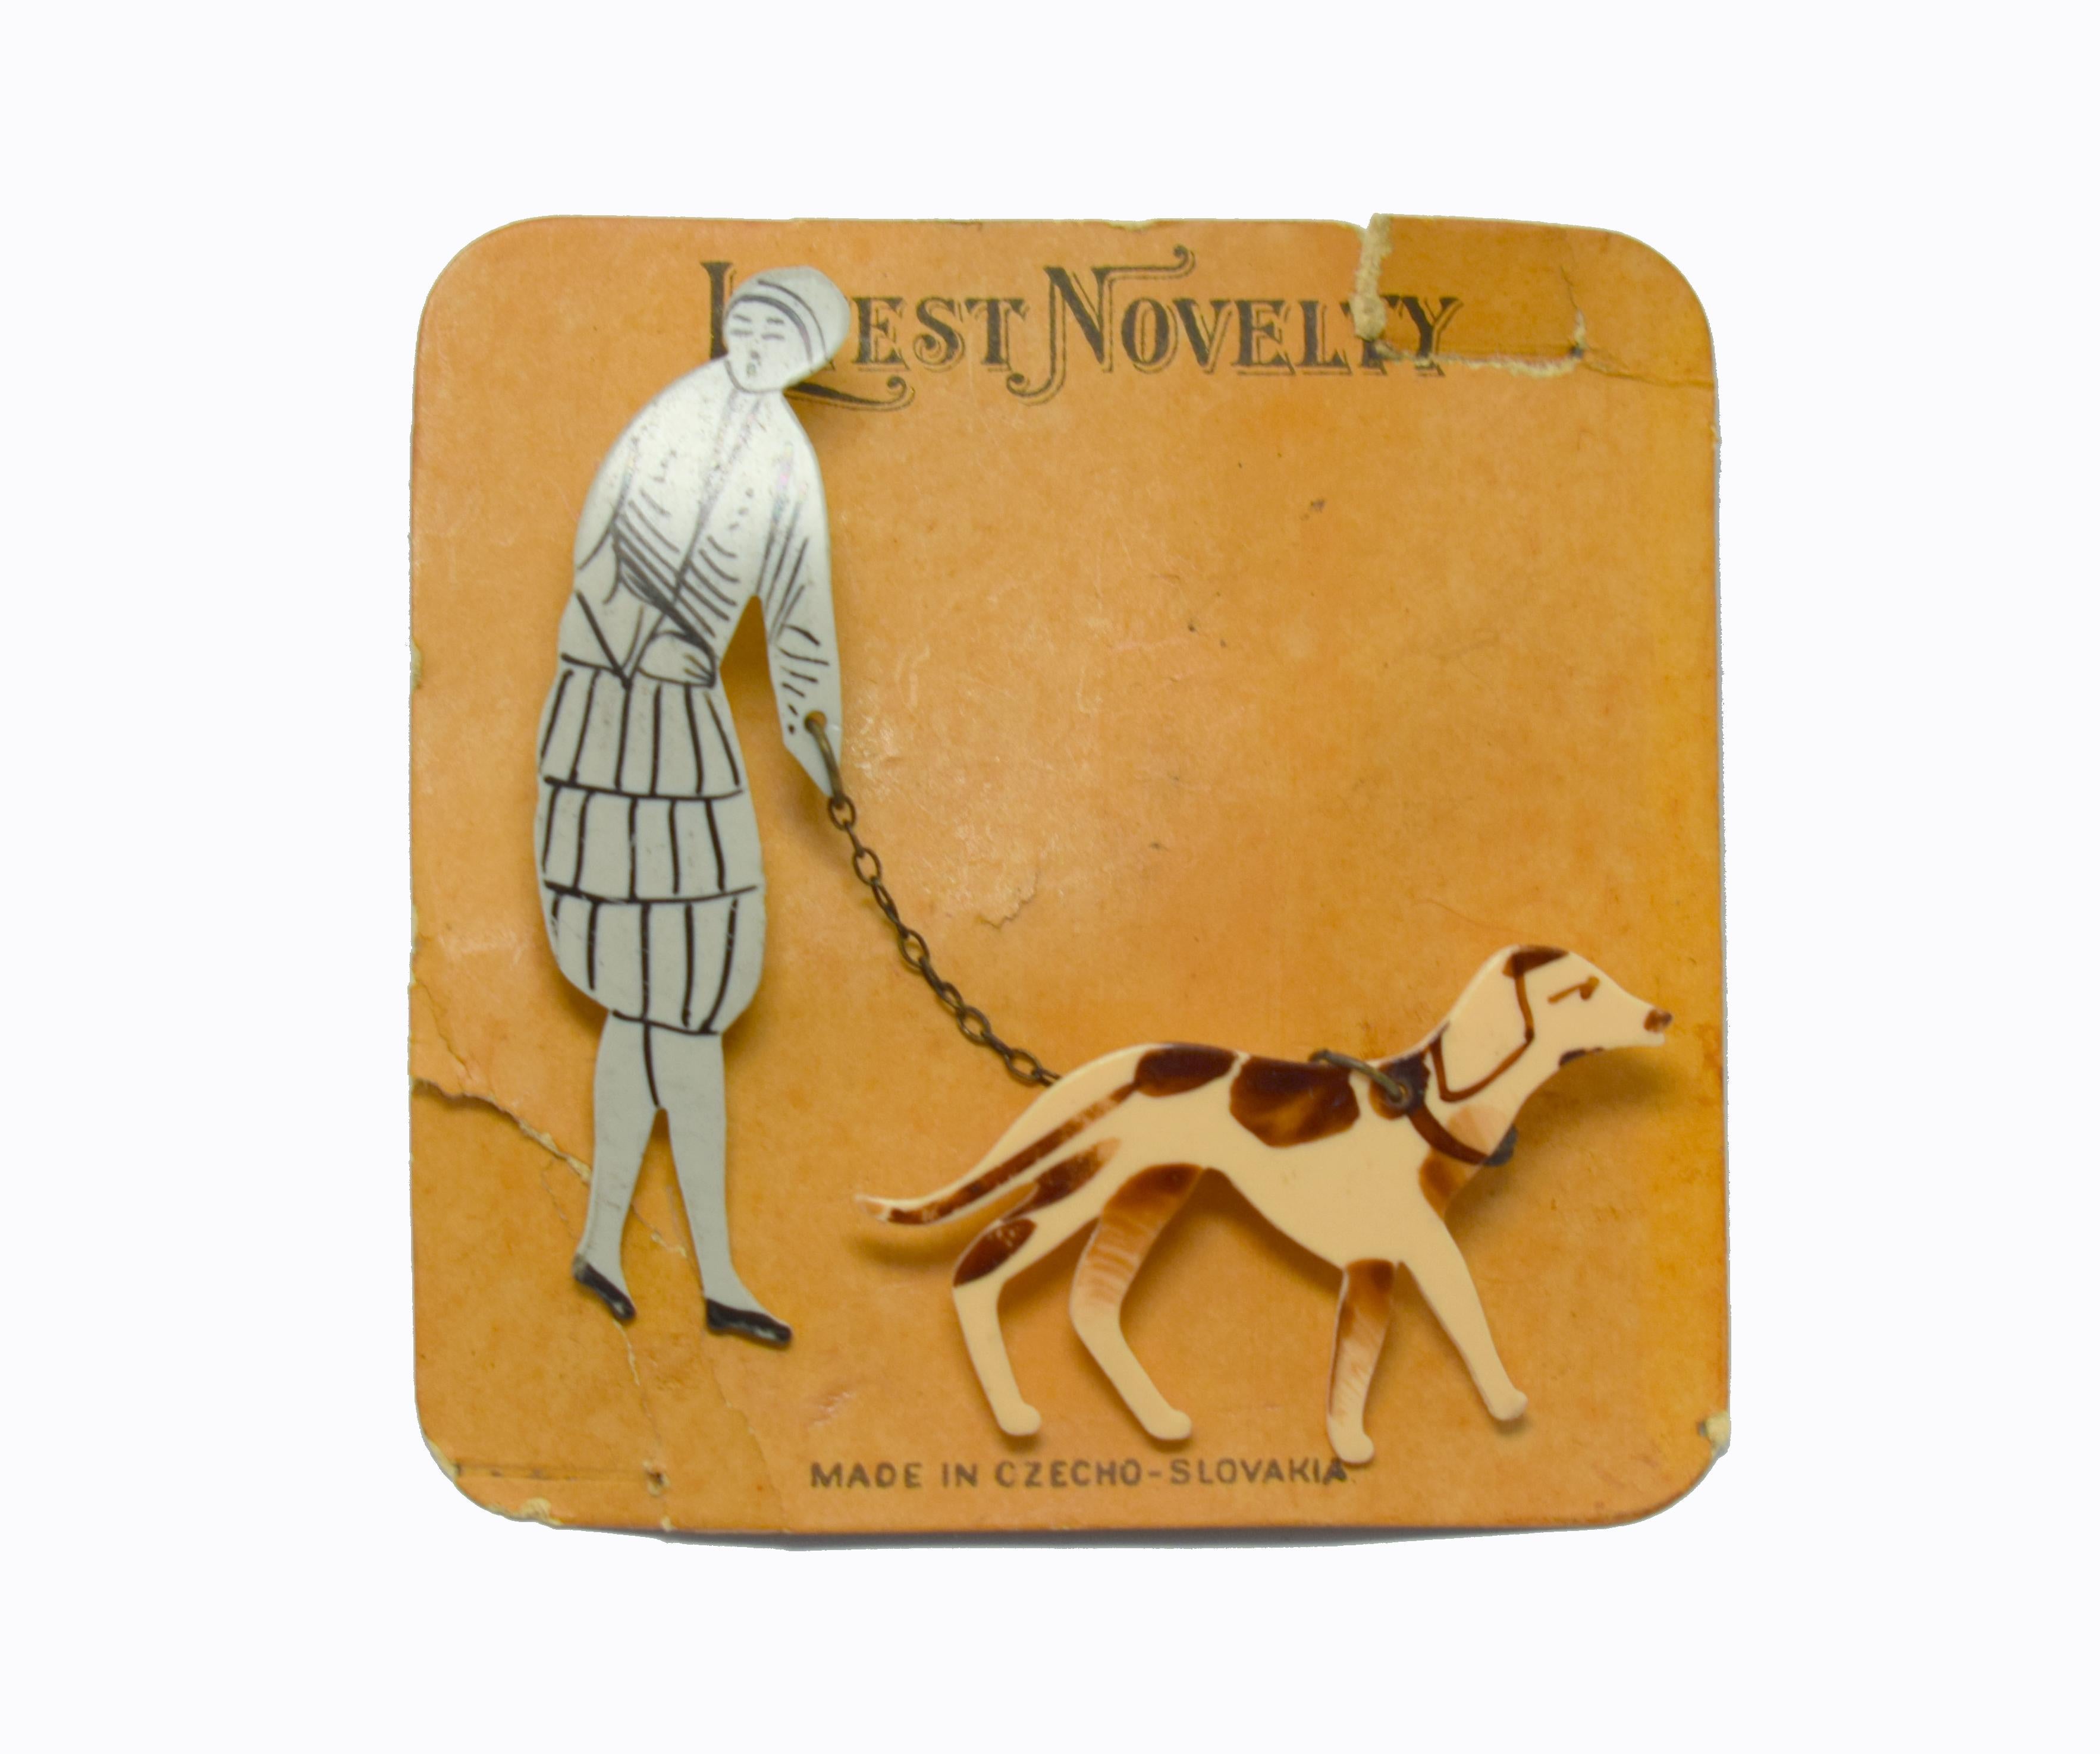 Beautiful piece of jewellery dating to the 1930's is this novelty brooch depicting a 1920's/30's lady walking her dog, possibly an Airedale. The lady is in the fashion of the day including a cloche hat and court shoes. Still on it's original card